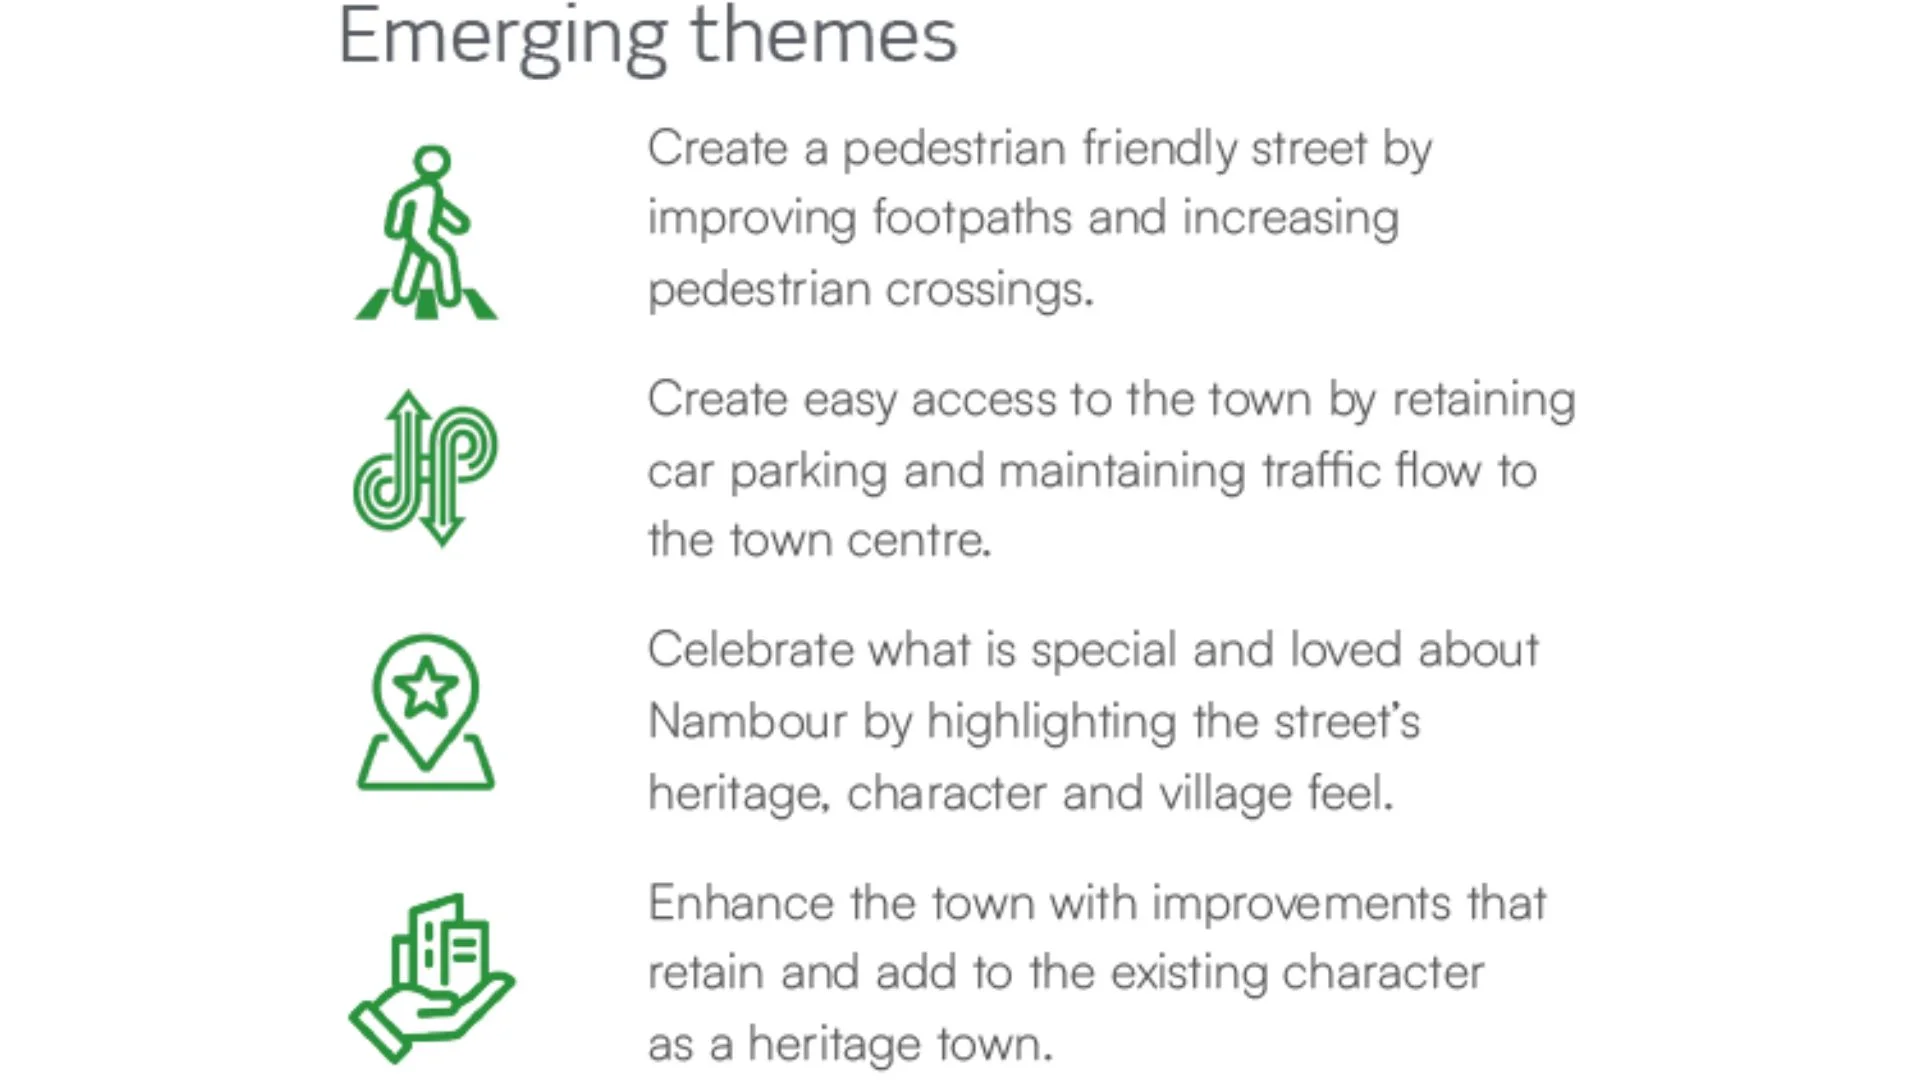 Emerging themes for the overall Nambour town centre